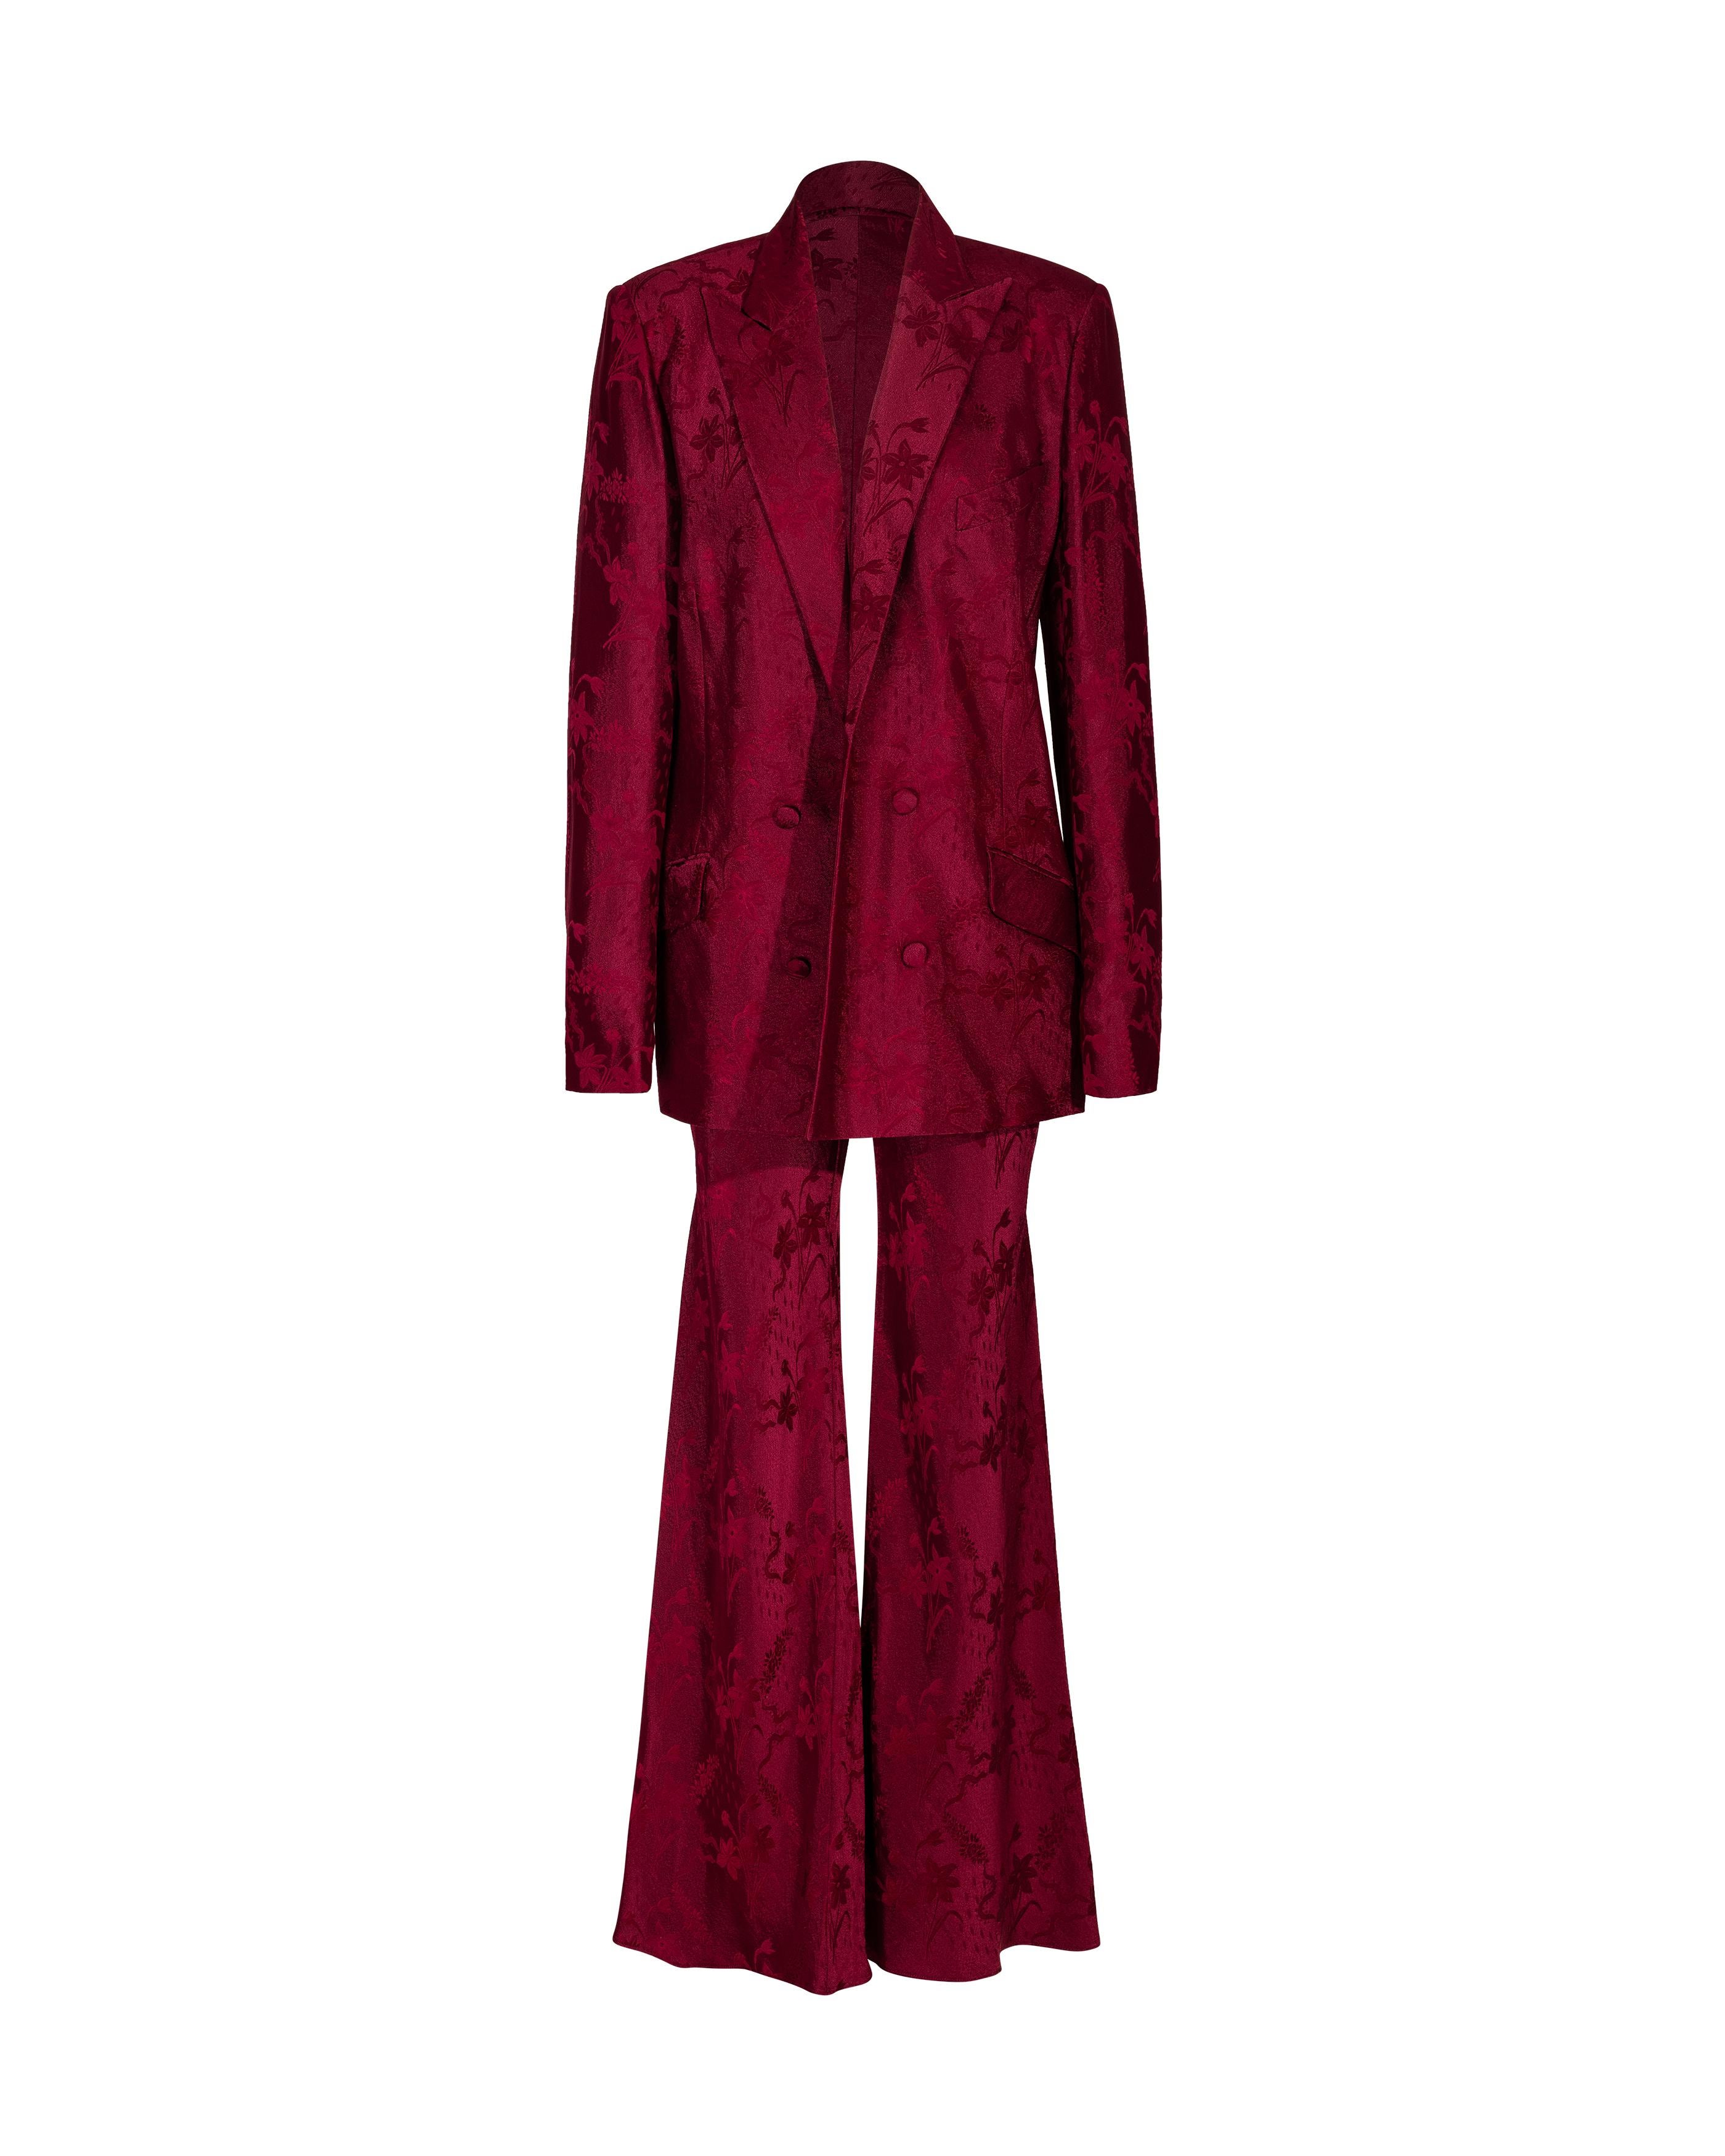 S/S 1998 John Galliano Deep Red Floral Pattern Pant Suit Set 6